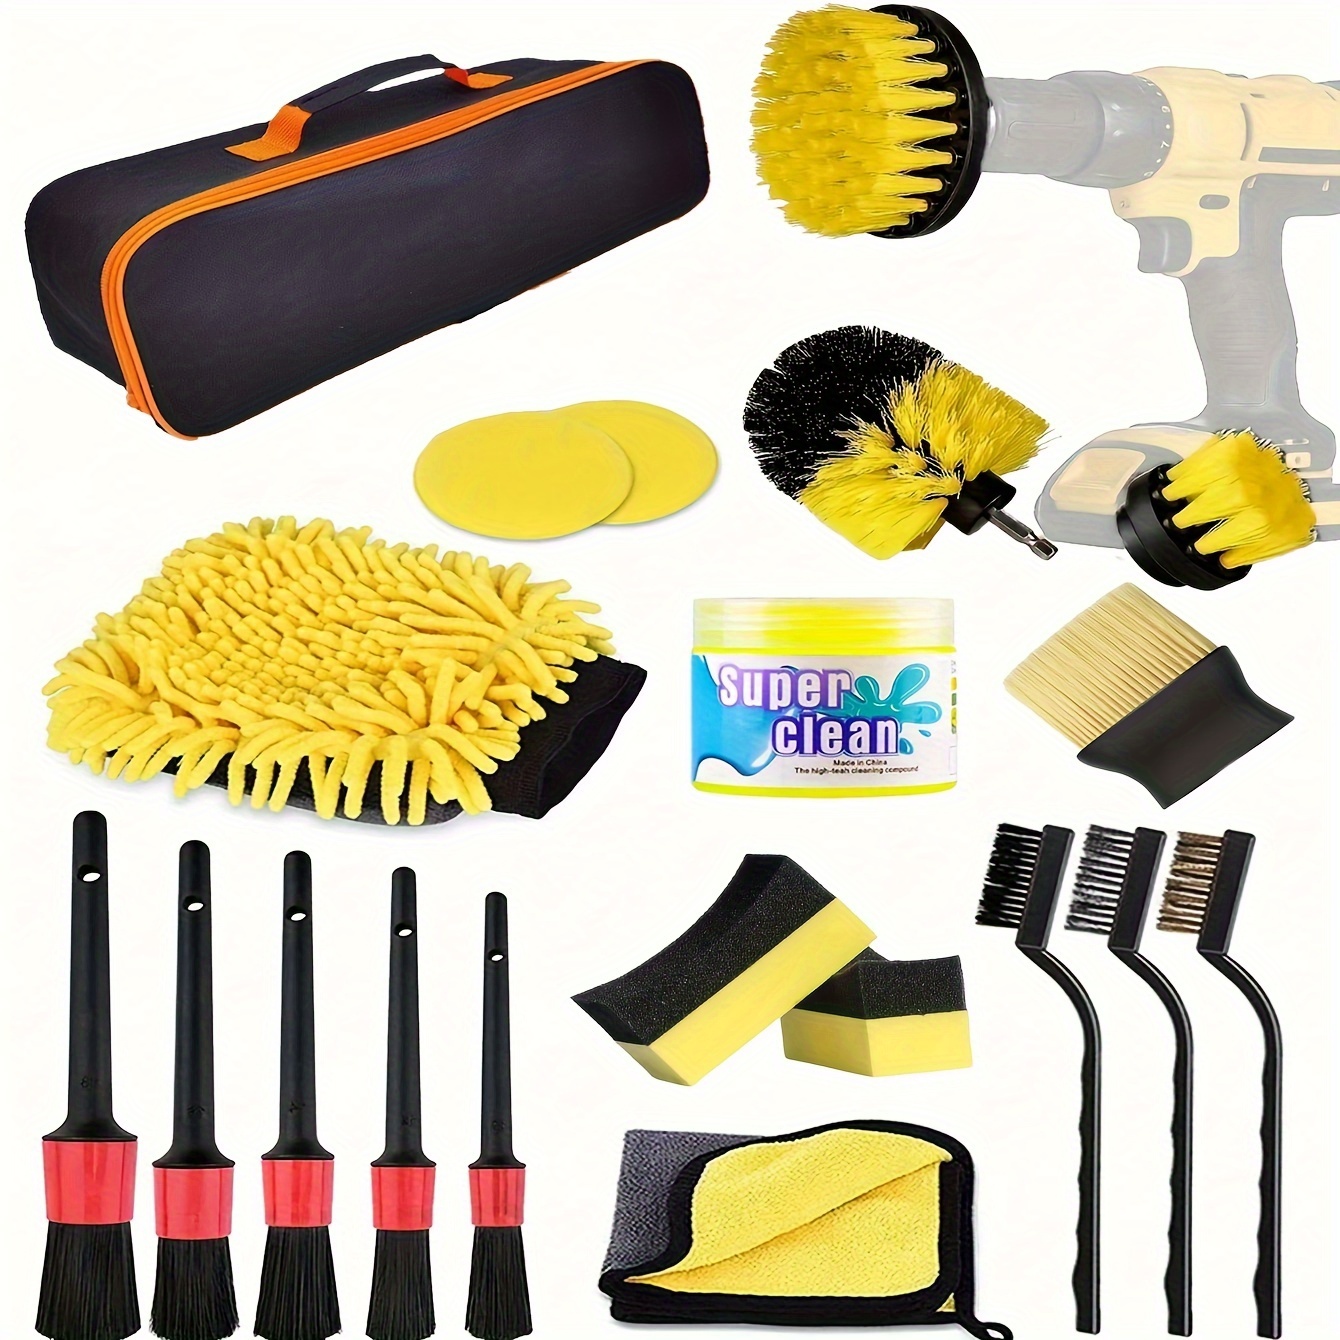 

A Set Of 20pcs Car Cleaning Kits, Including Car Wash Brushes, Car Wash Gloves, Car Wash Towels, And Cleaning Putty